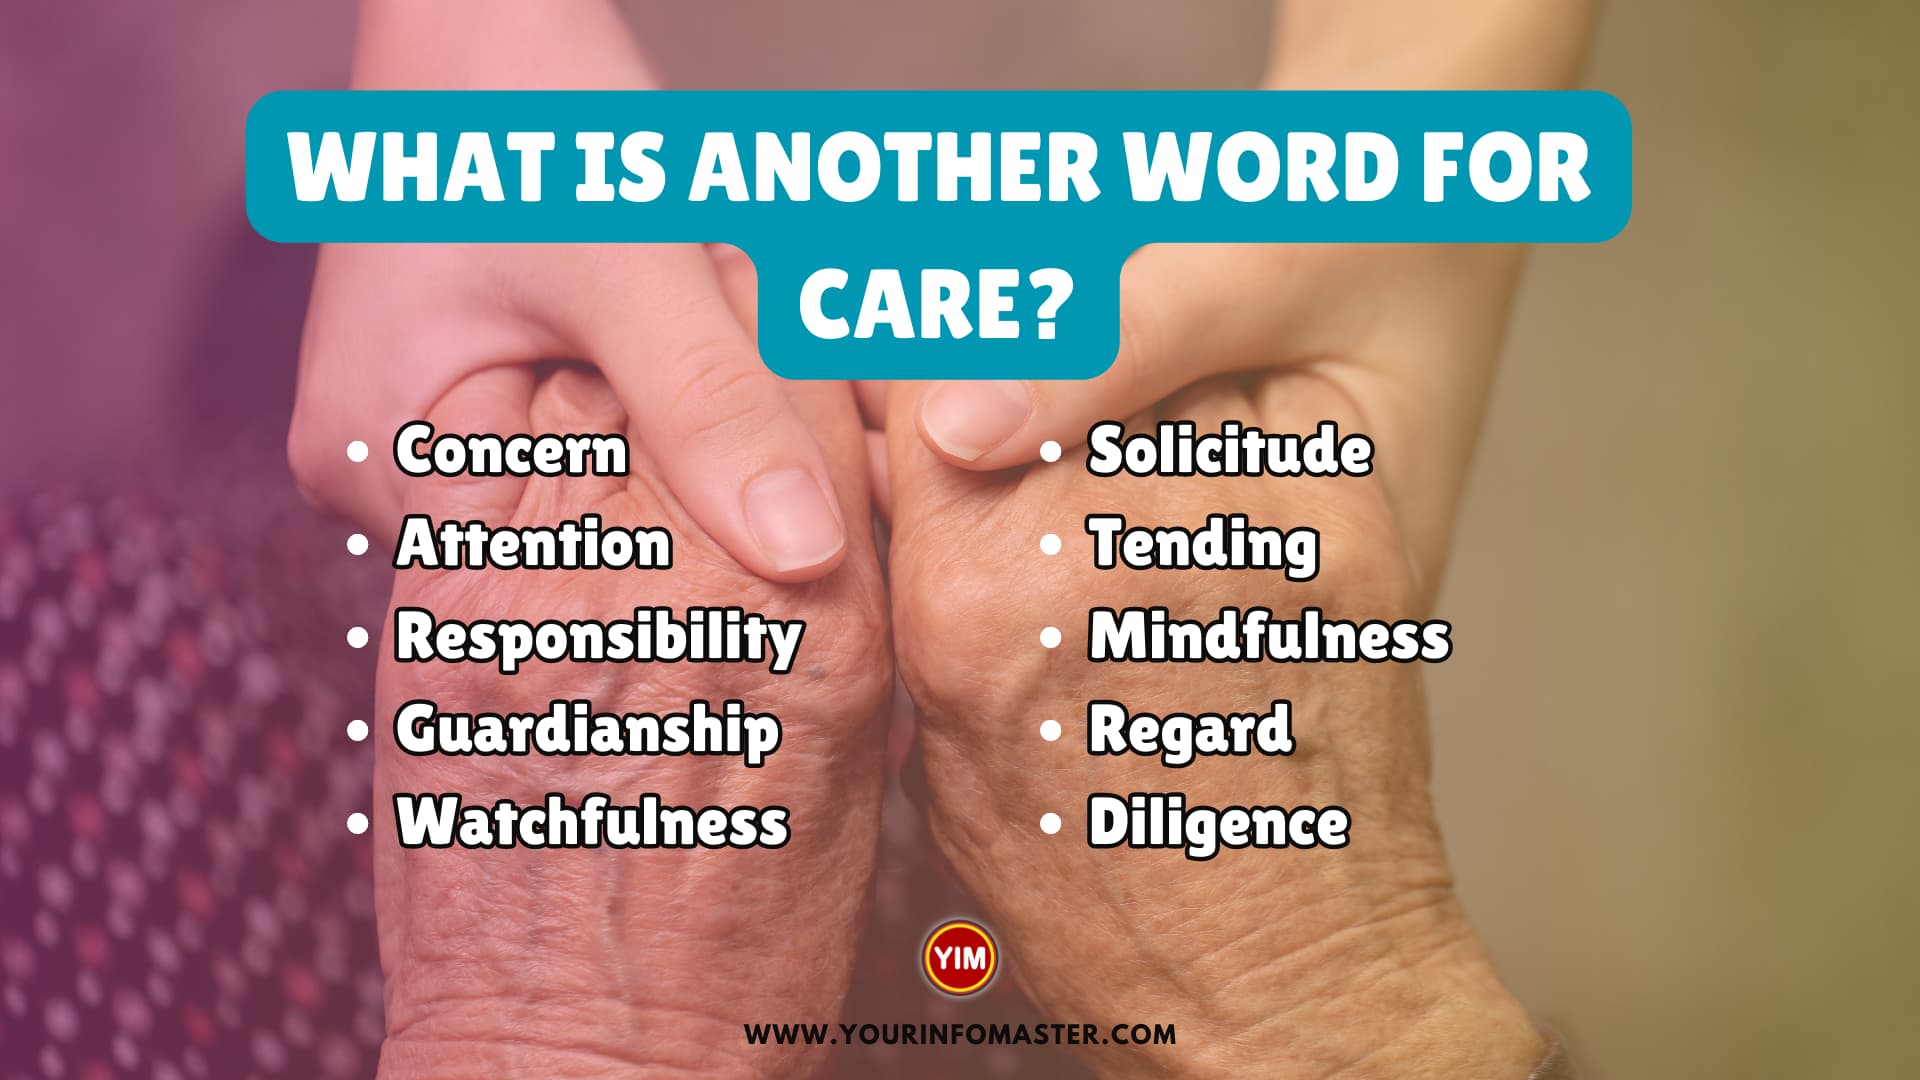 What is another word for Care